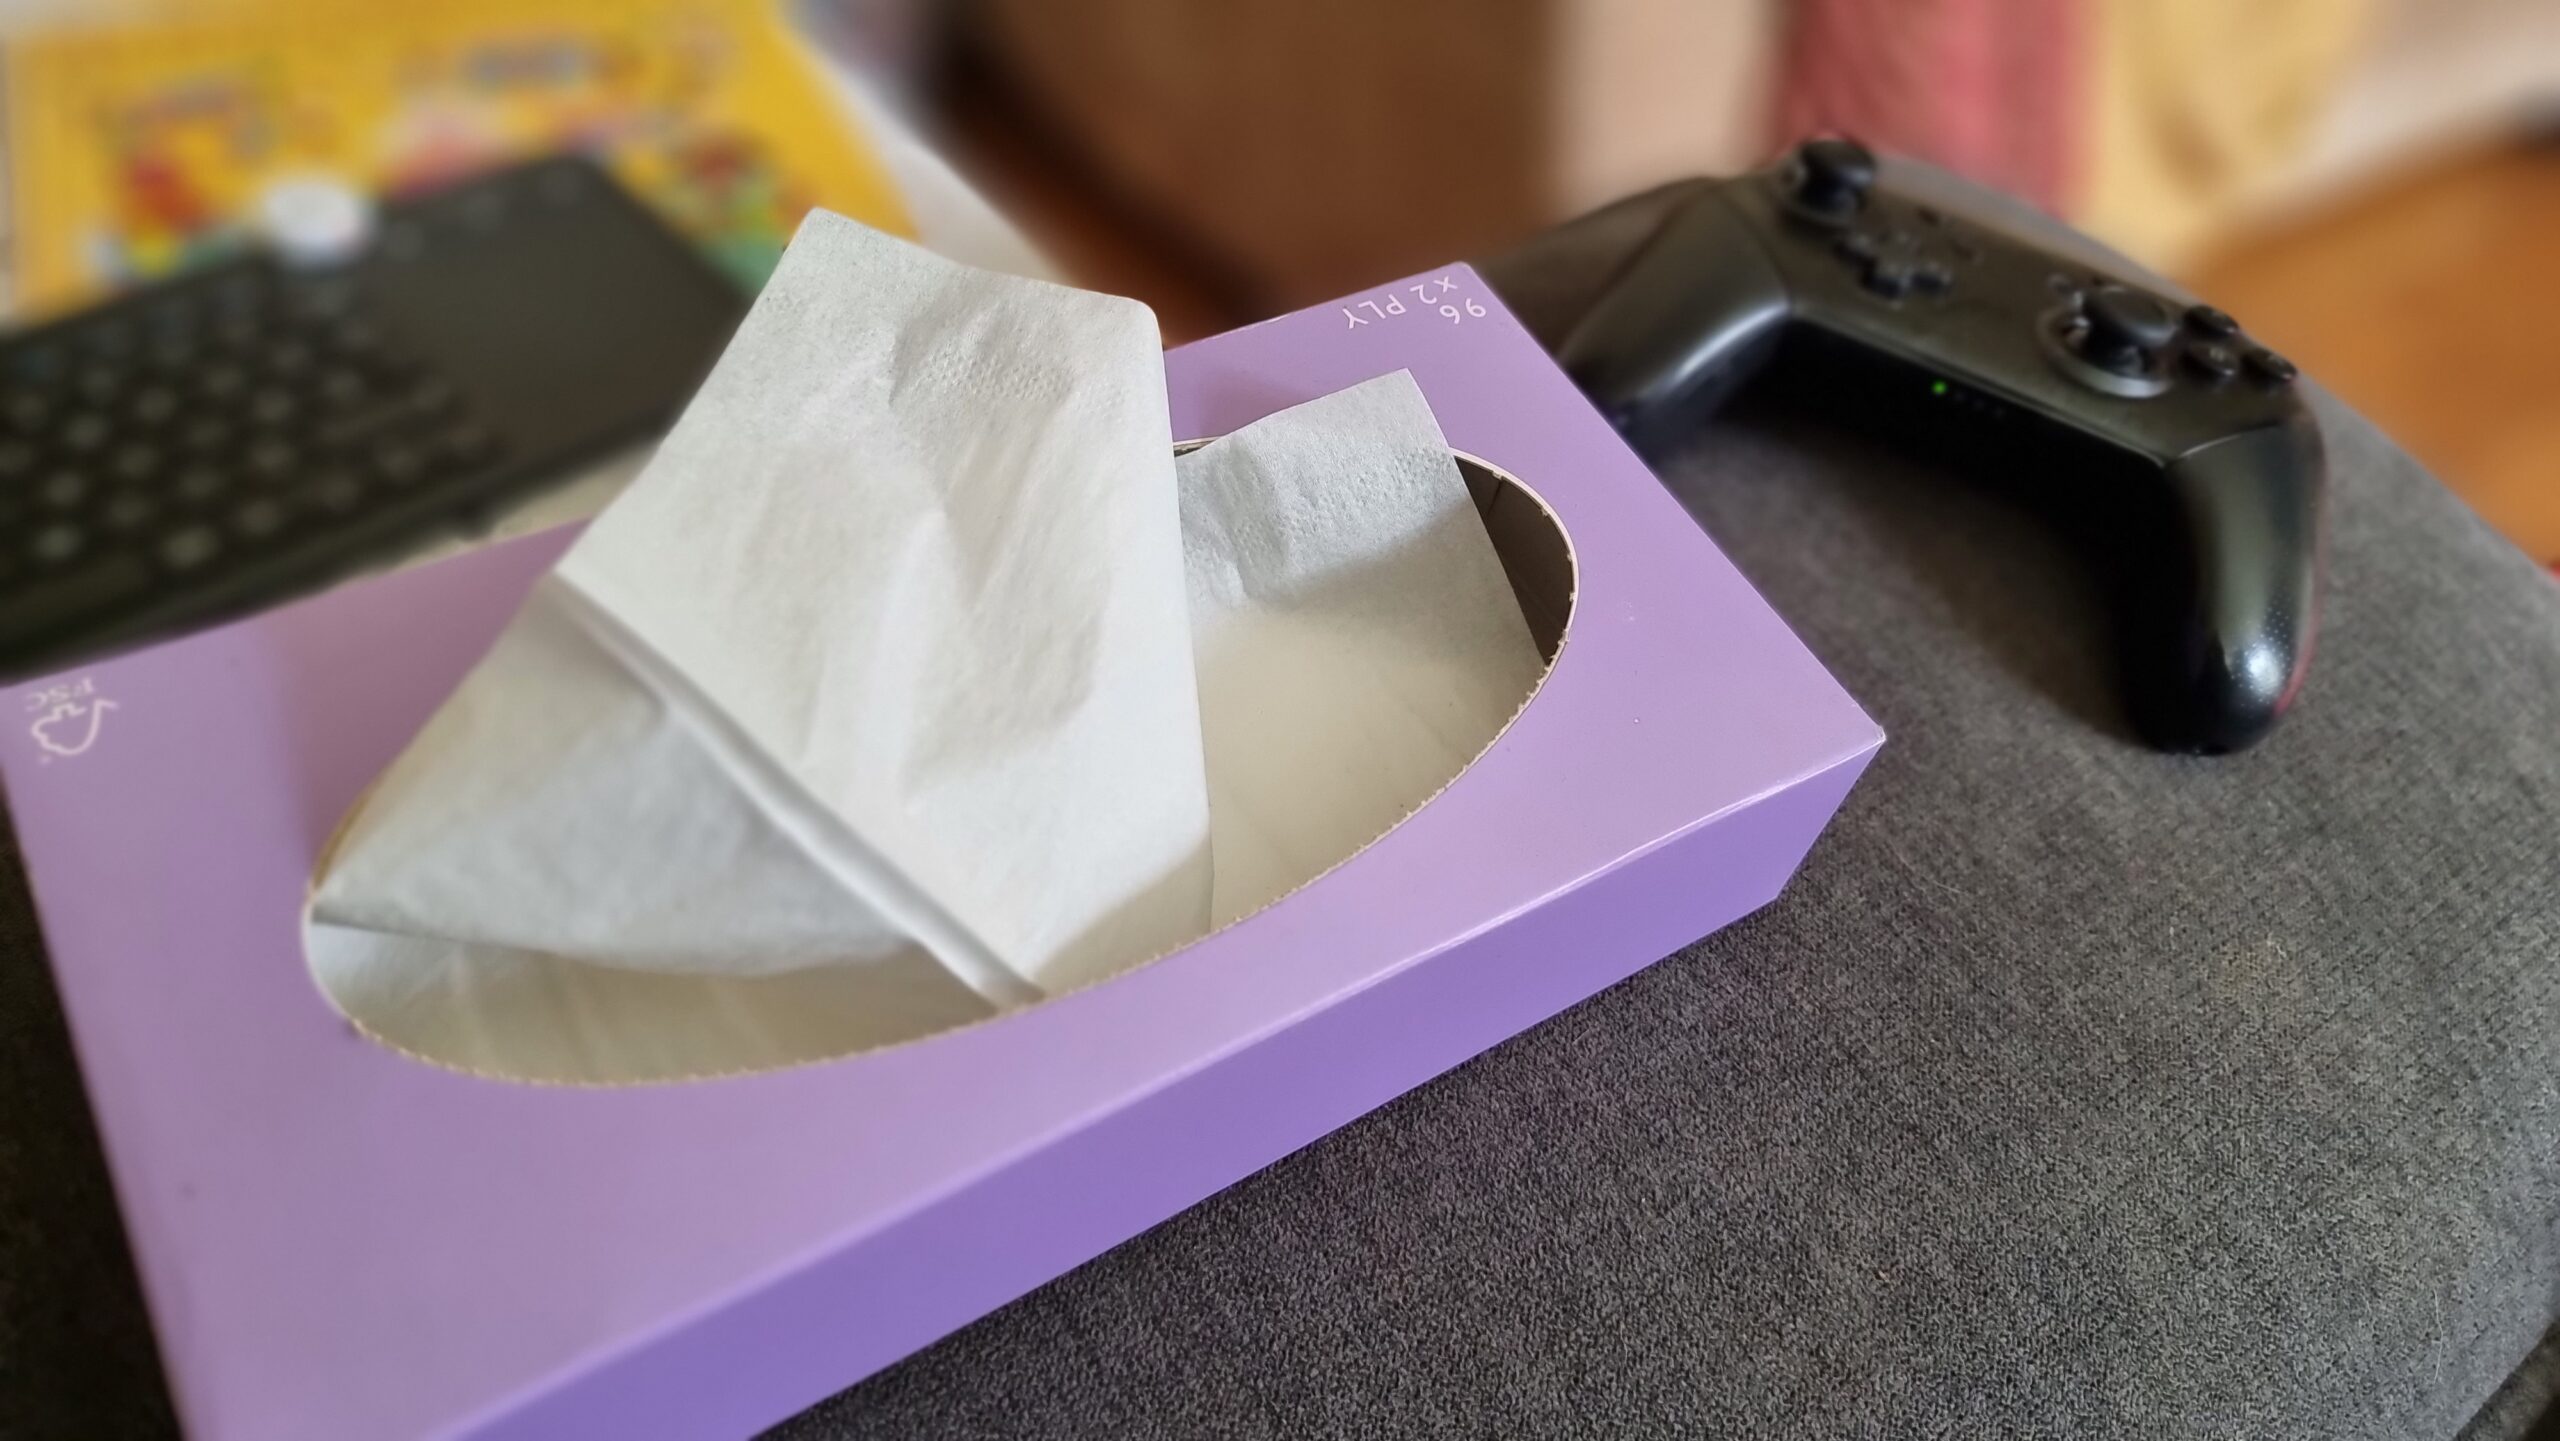 A box of tissues and a Nintendo Switch Pro Controller on the arm of a sofa.